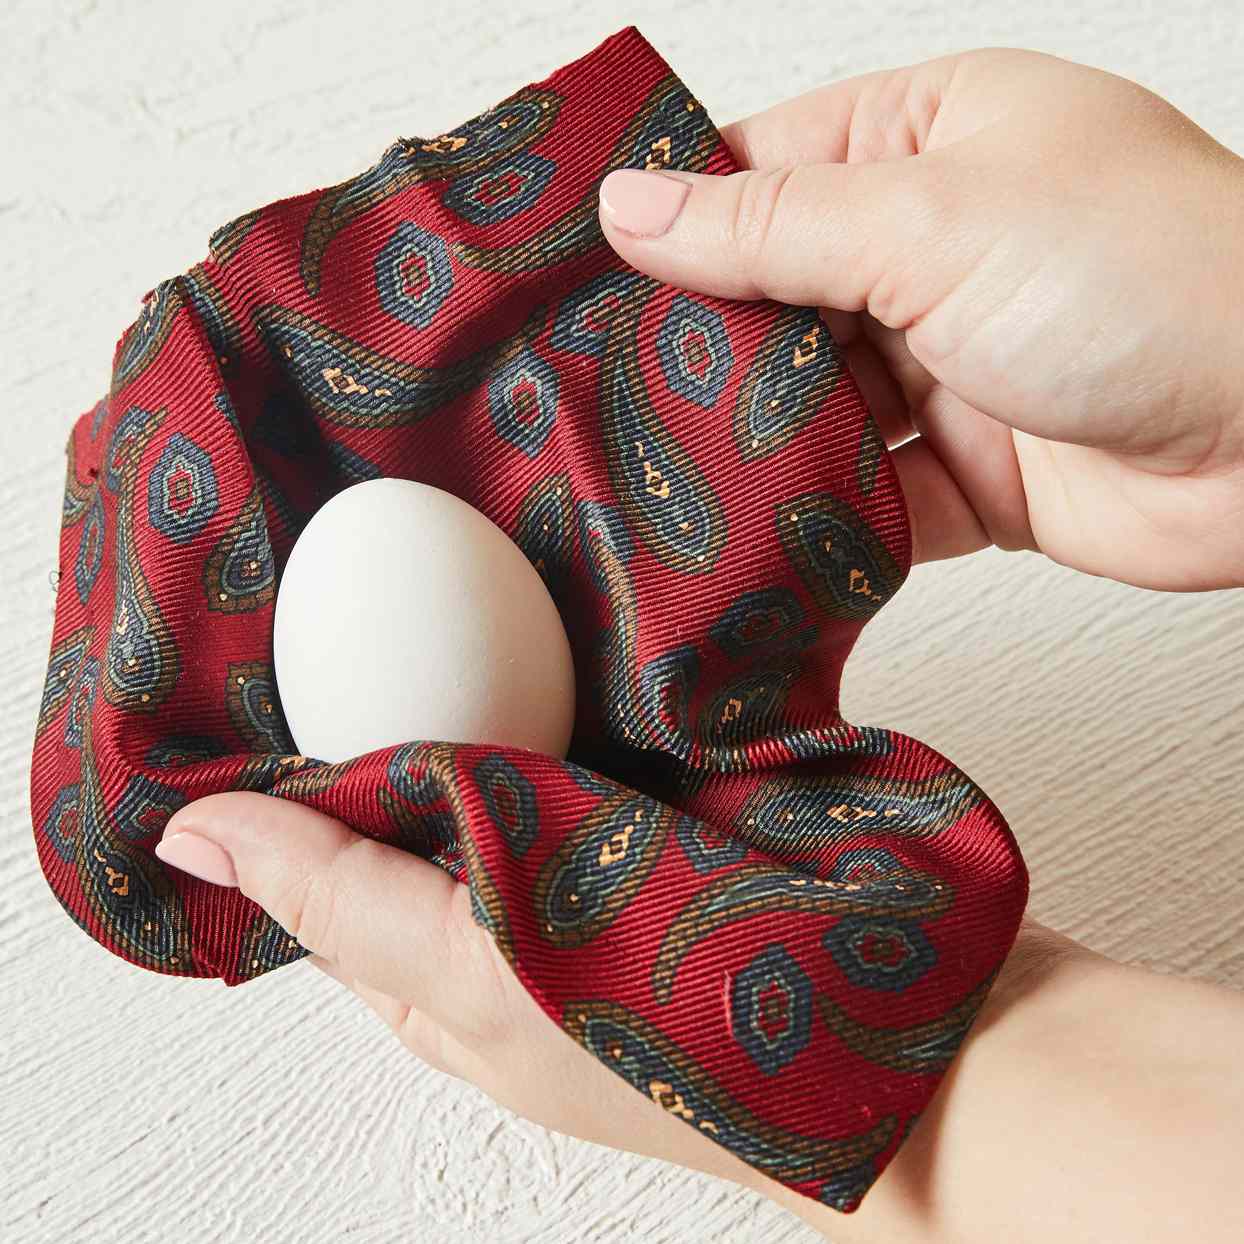 wrapping egg in handkerchief